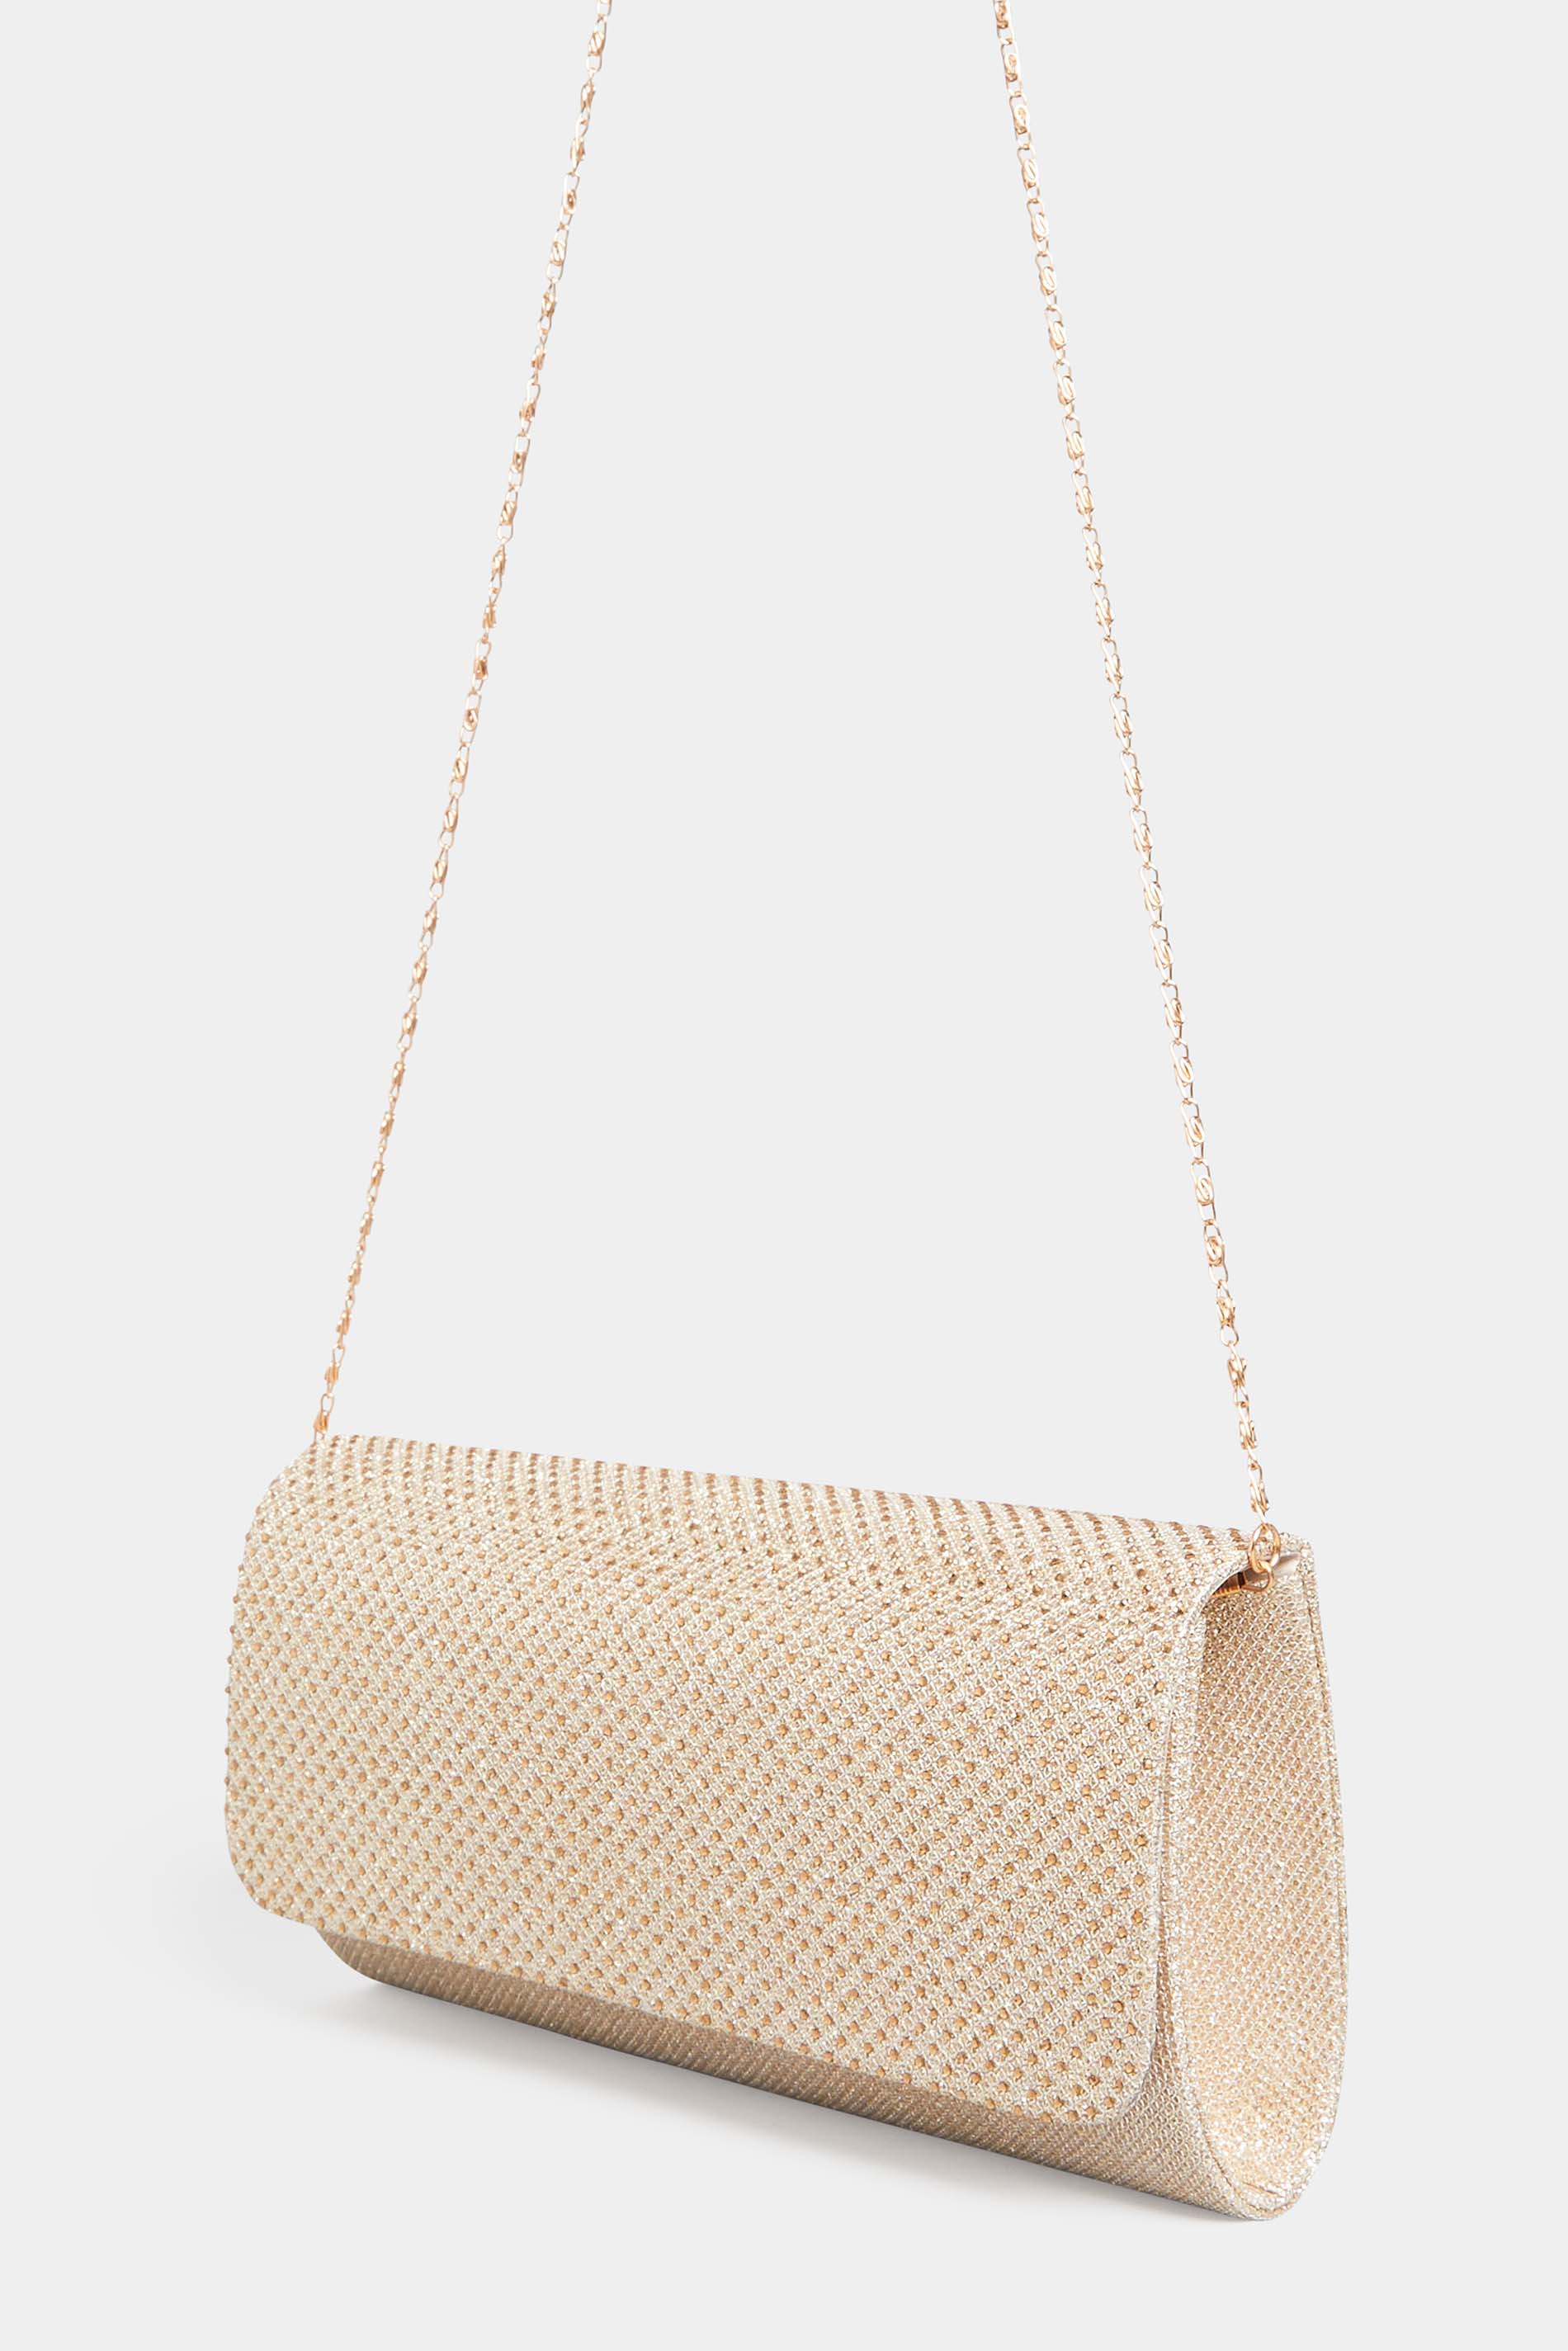 Rose Gold Diamante Clutch Bag | Yours Clothing